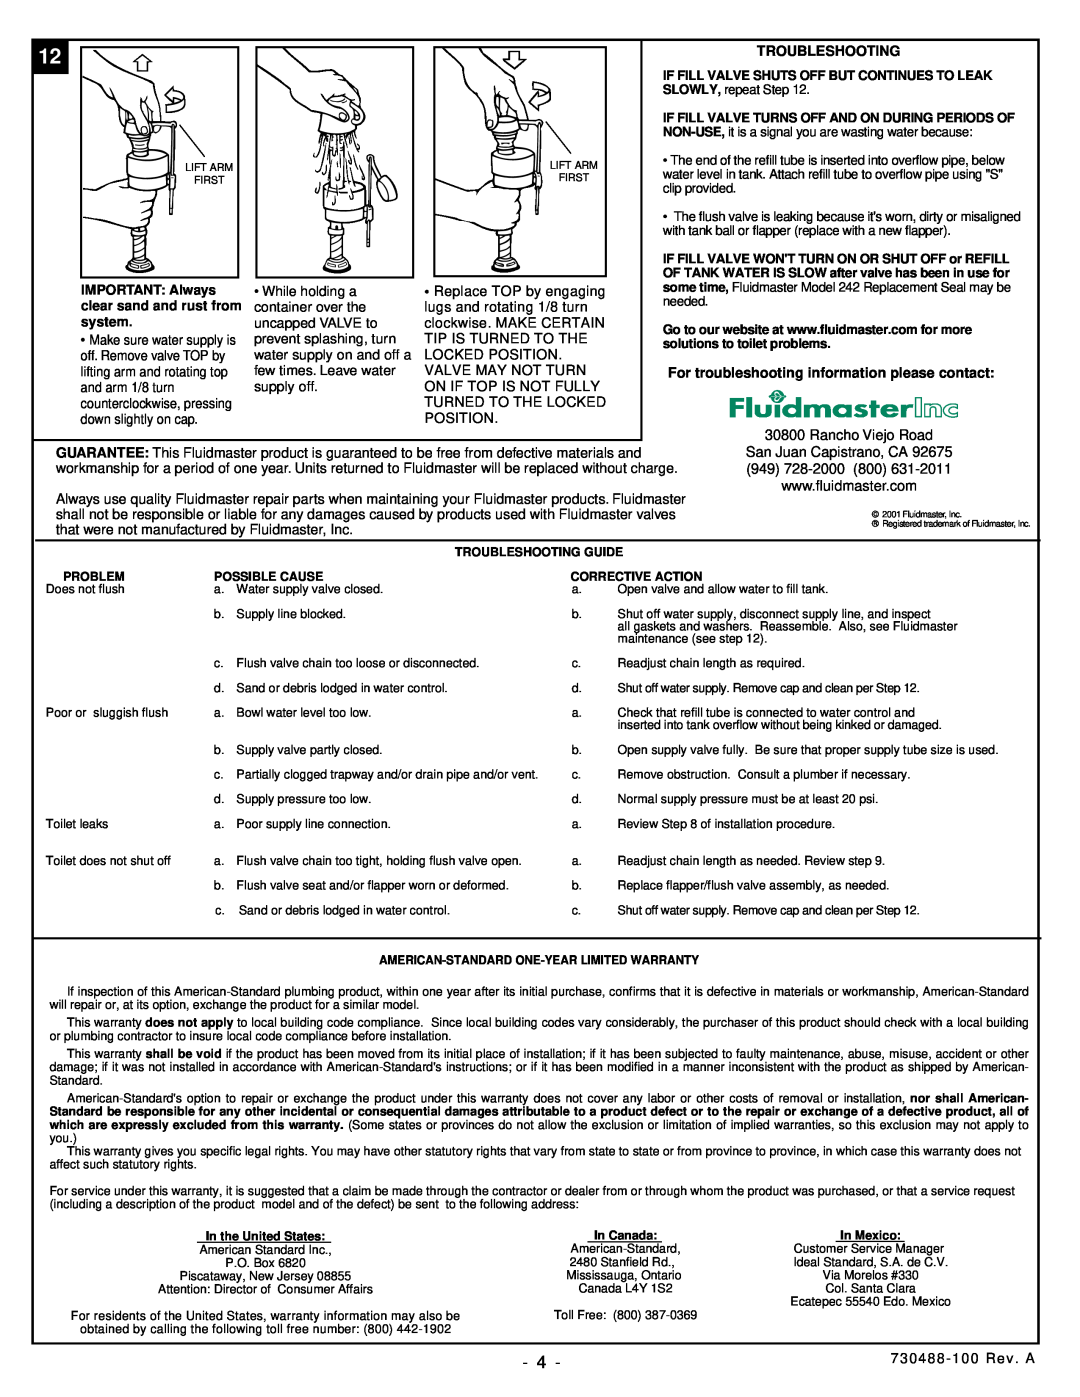 American Standard 2038.700 installation instructions Troubleshooting, For troubleshooting information please contact 